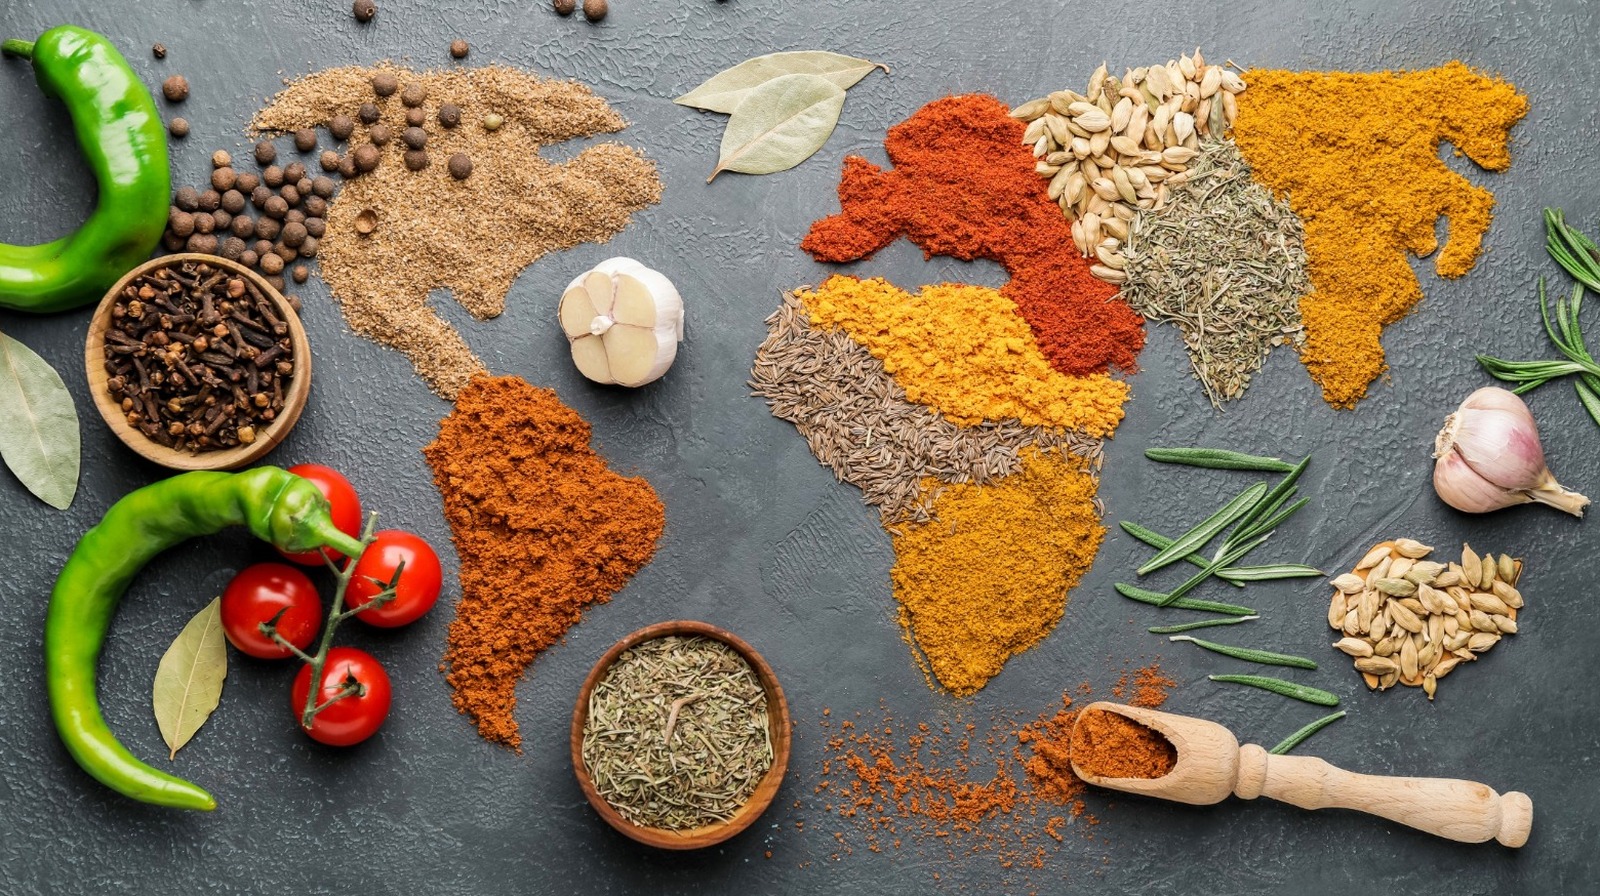 Crossover & West Indies Spice Blends